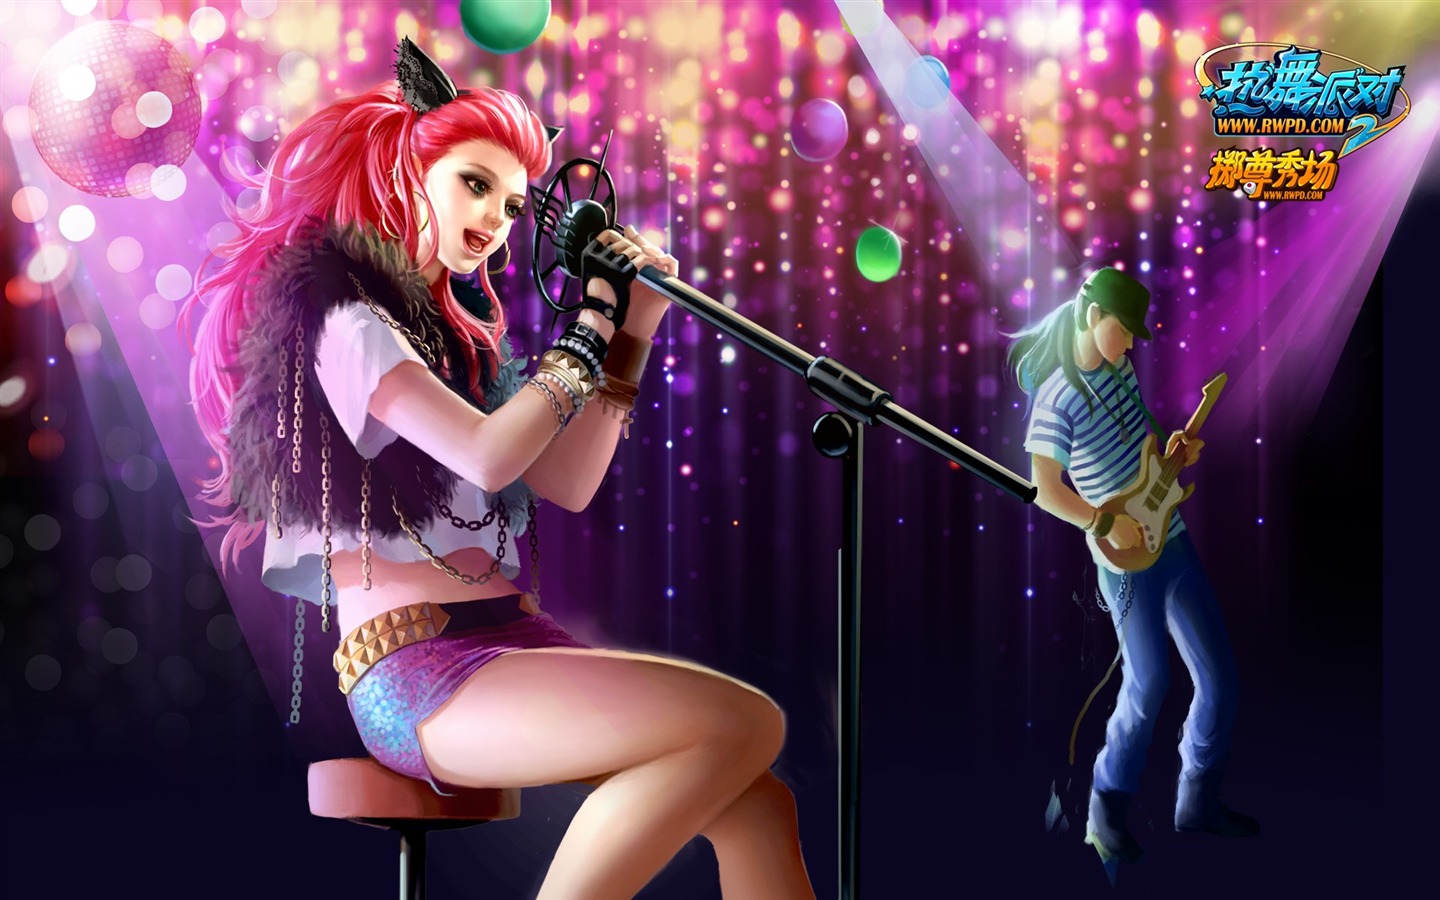 Online game Hot Dance Party II official wallpapers #38 - 1440x900